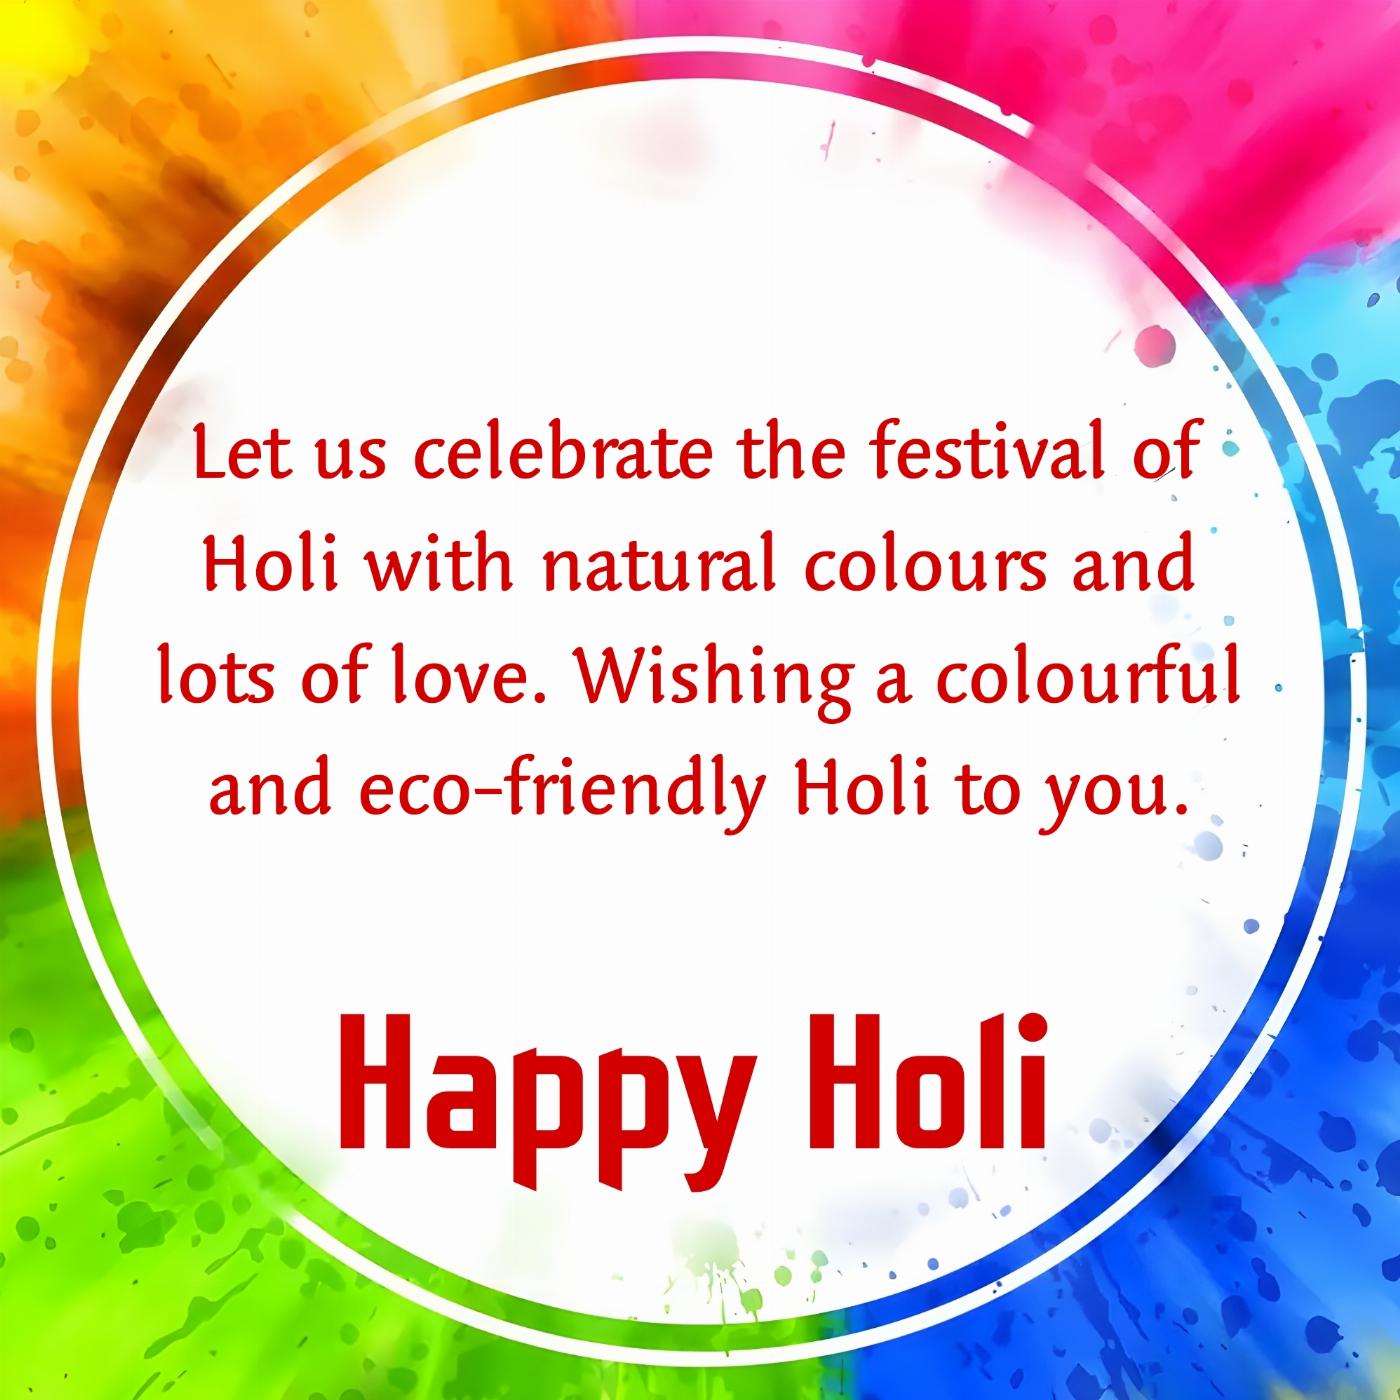 Let us celebrate the festival of Holi with natural colours and lots of love